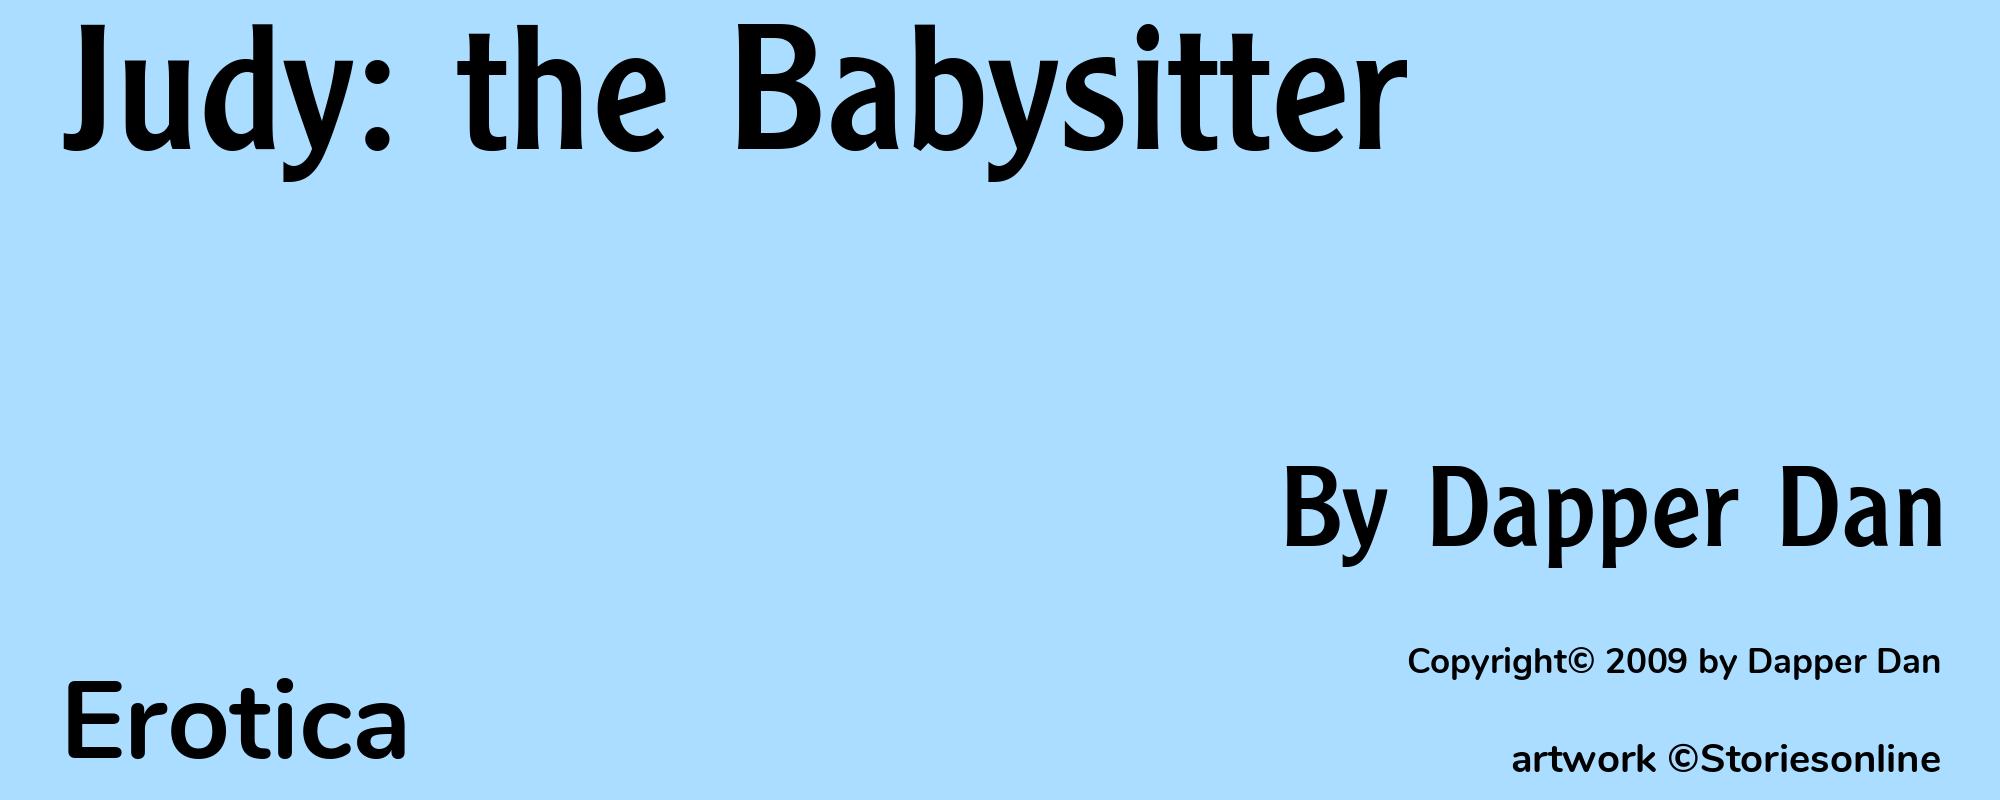 Judy: the Babysitter - Cover